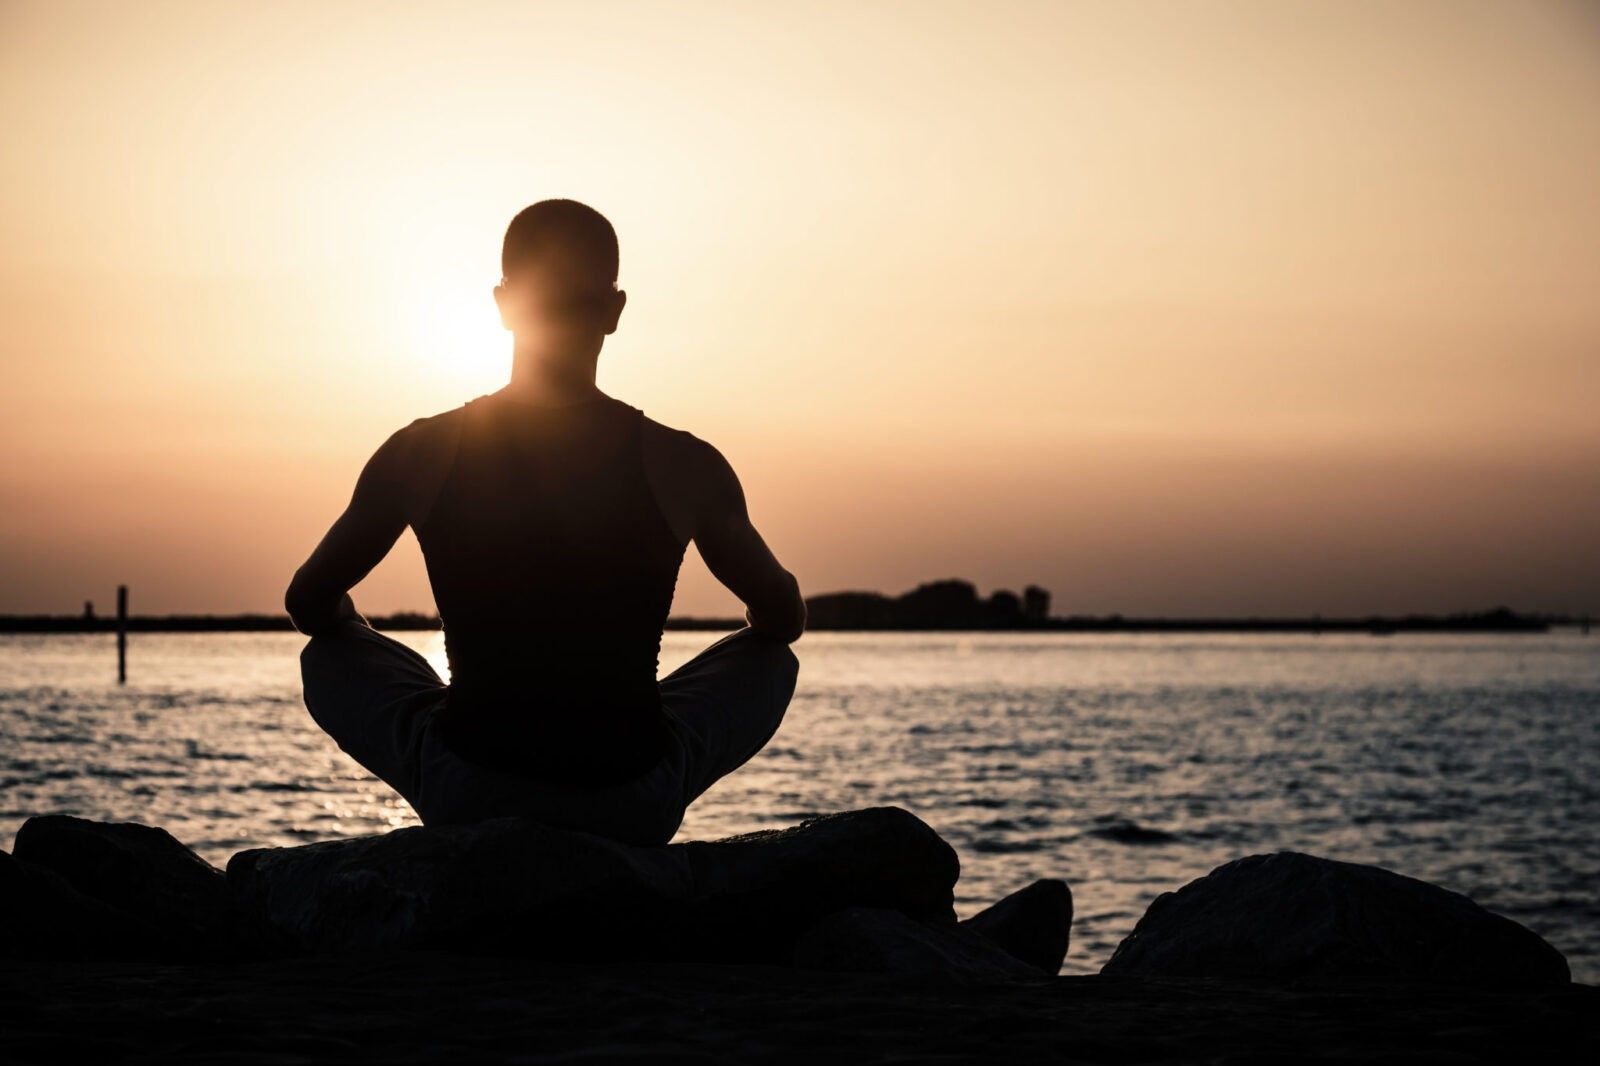 7 MIndfulness Tips to Help You Live in the Present